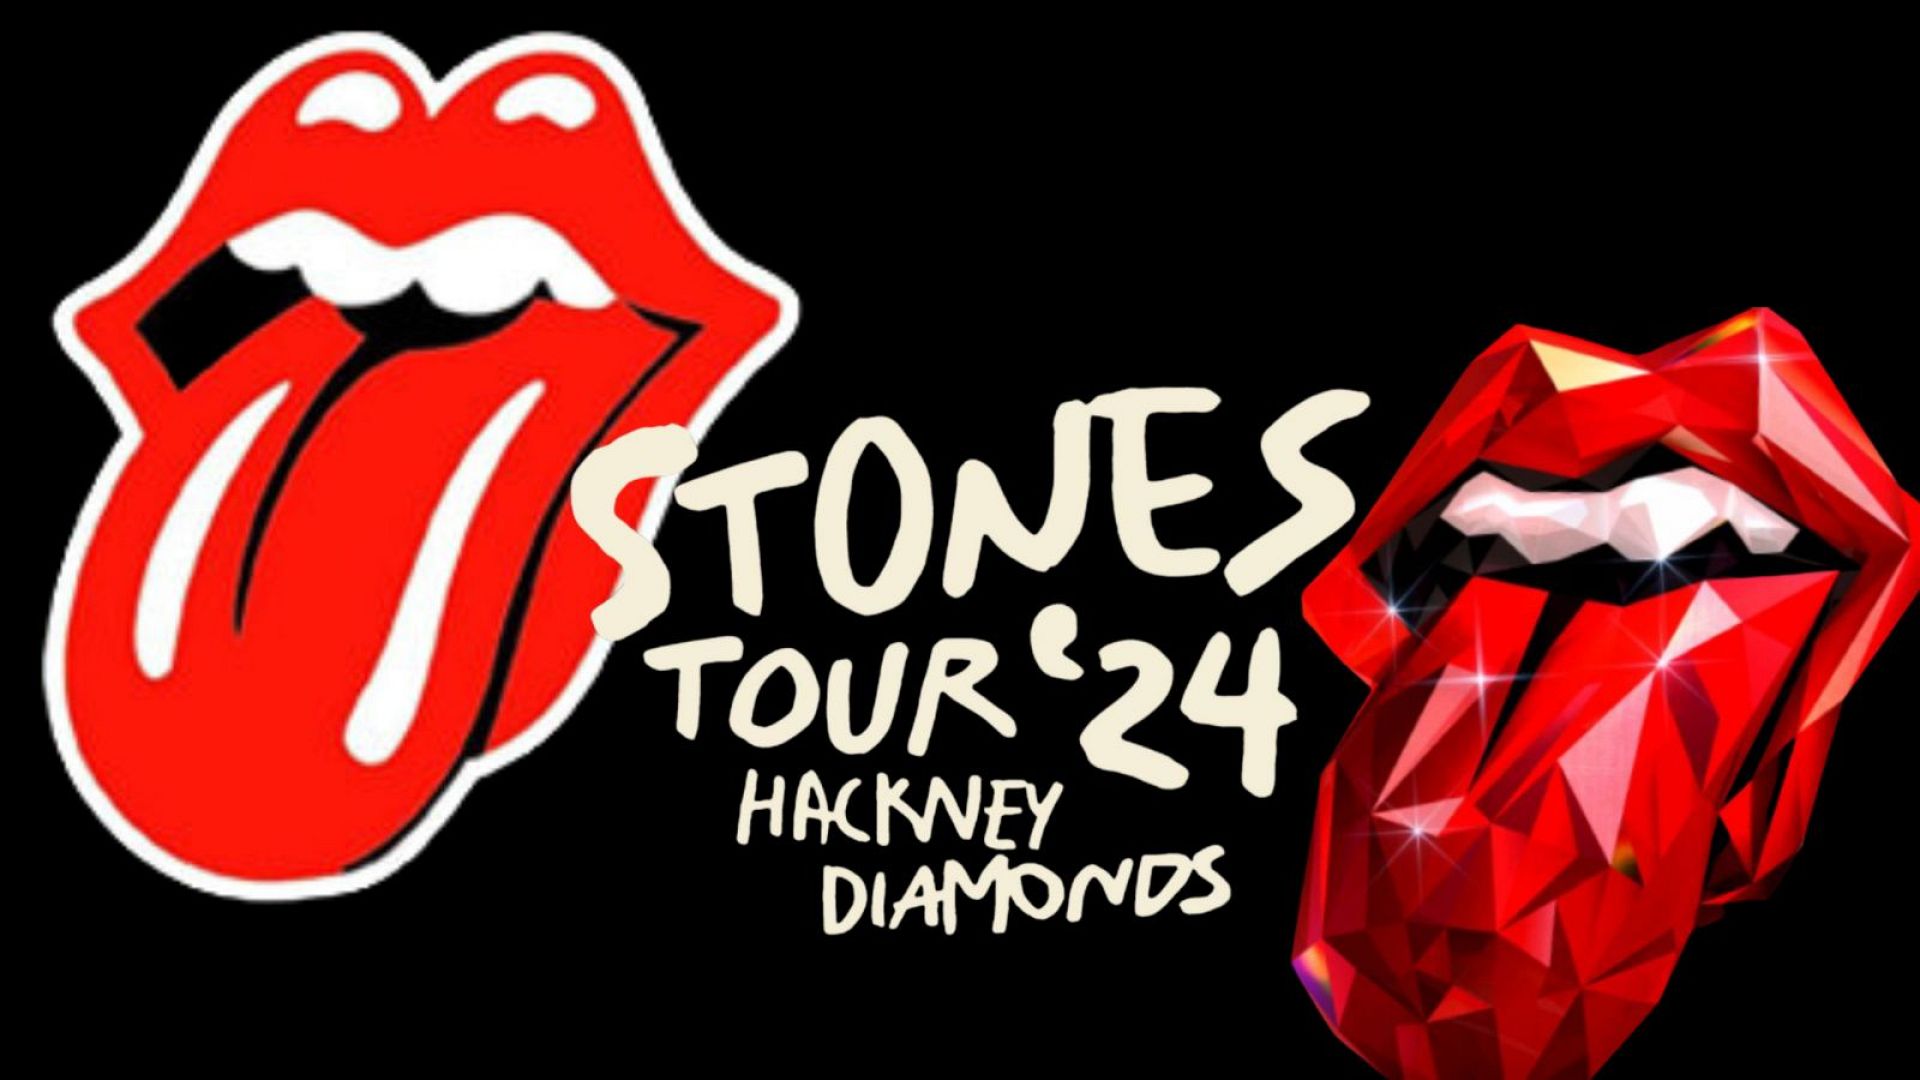 The Rolling Stones announce 2024 tour - But what's behind that tongue ...